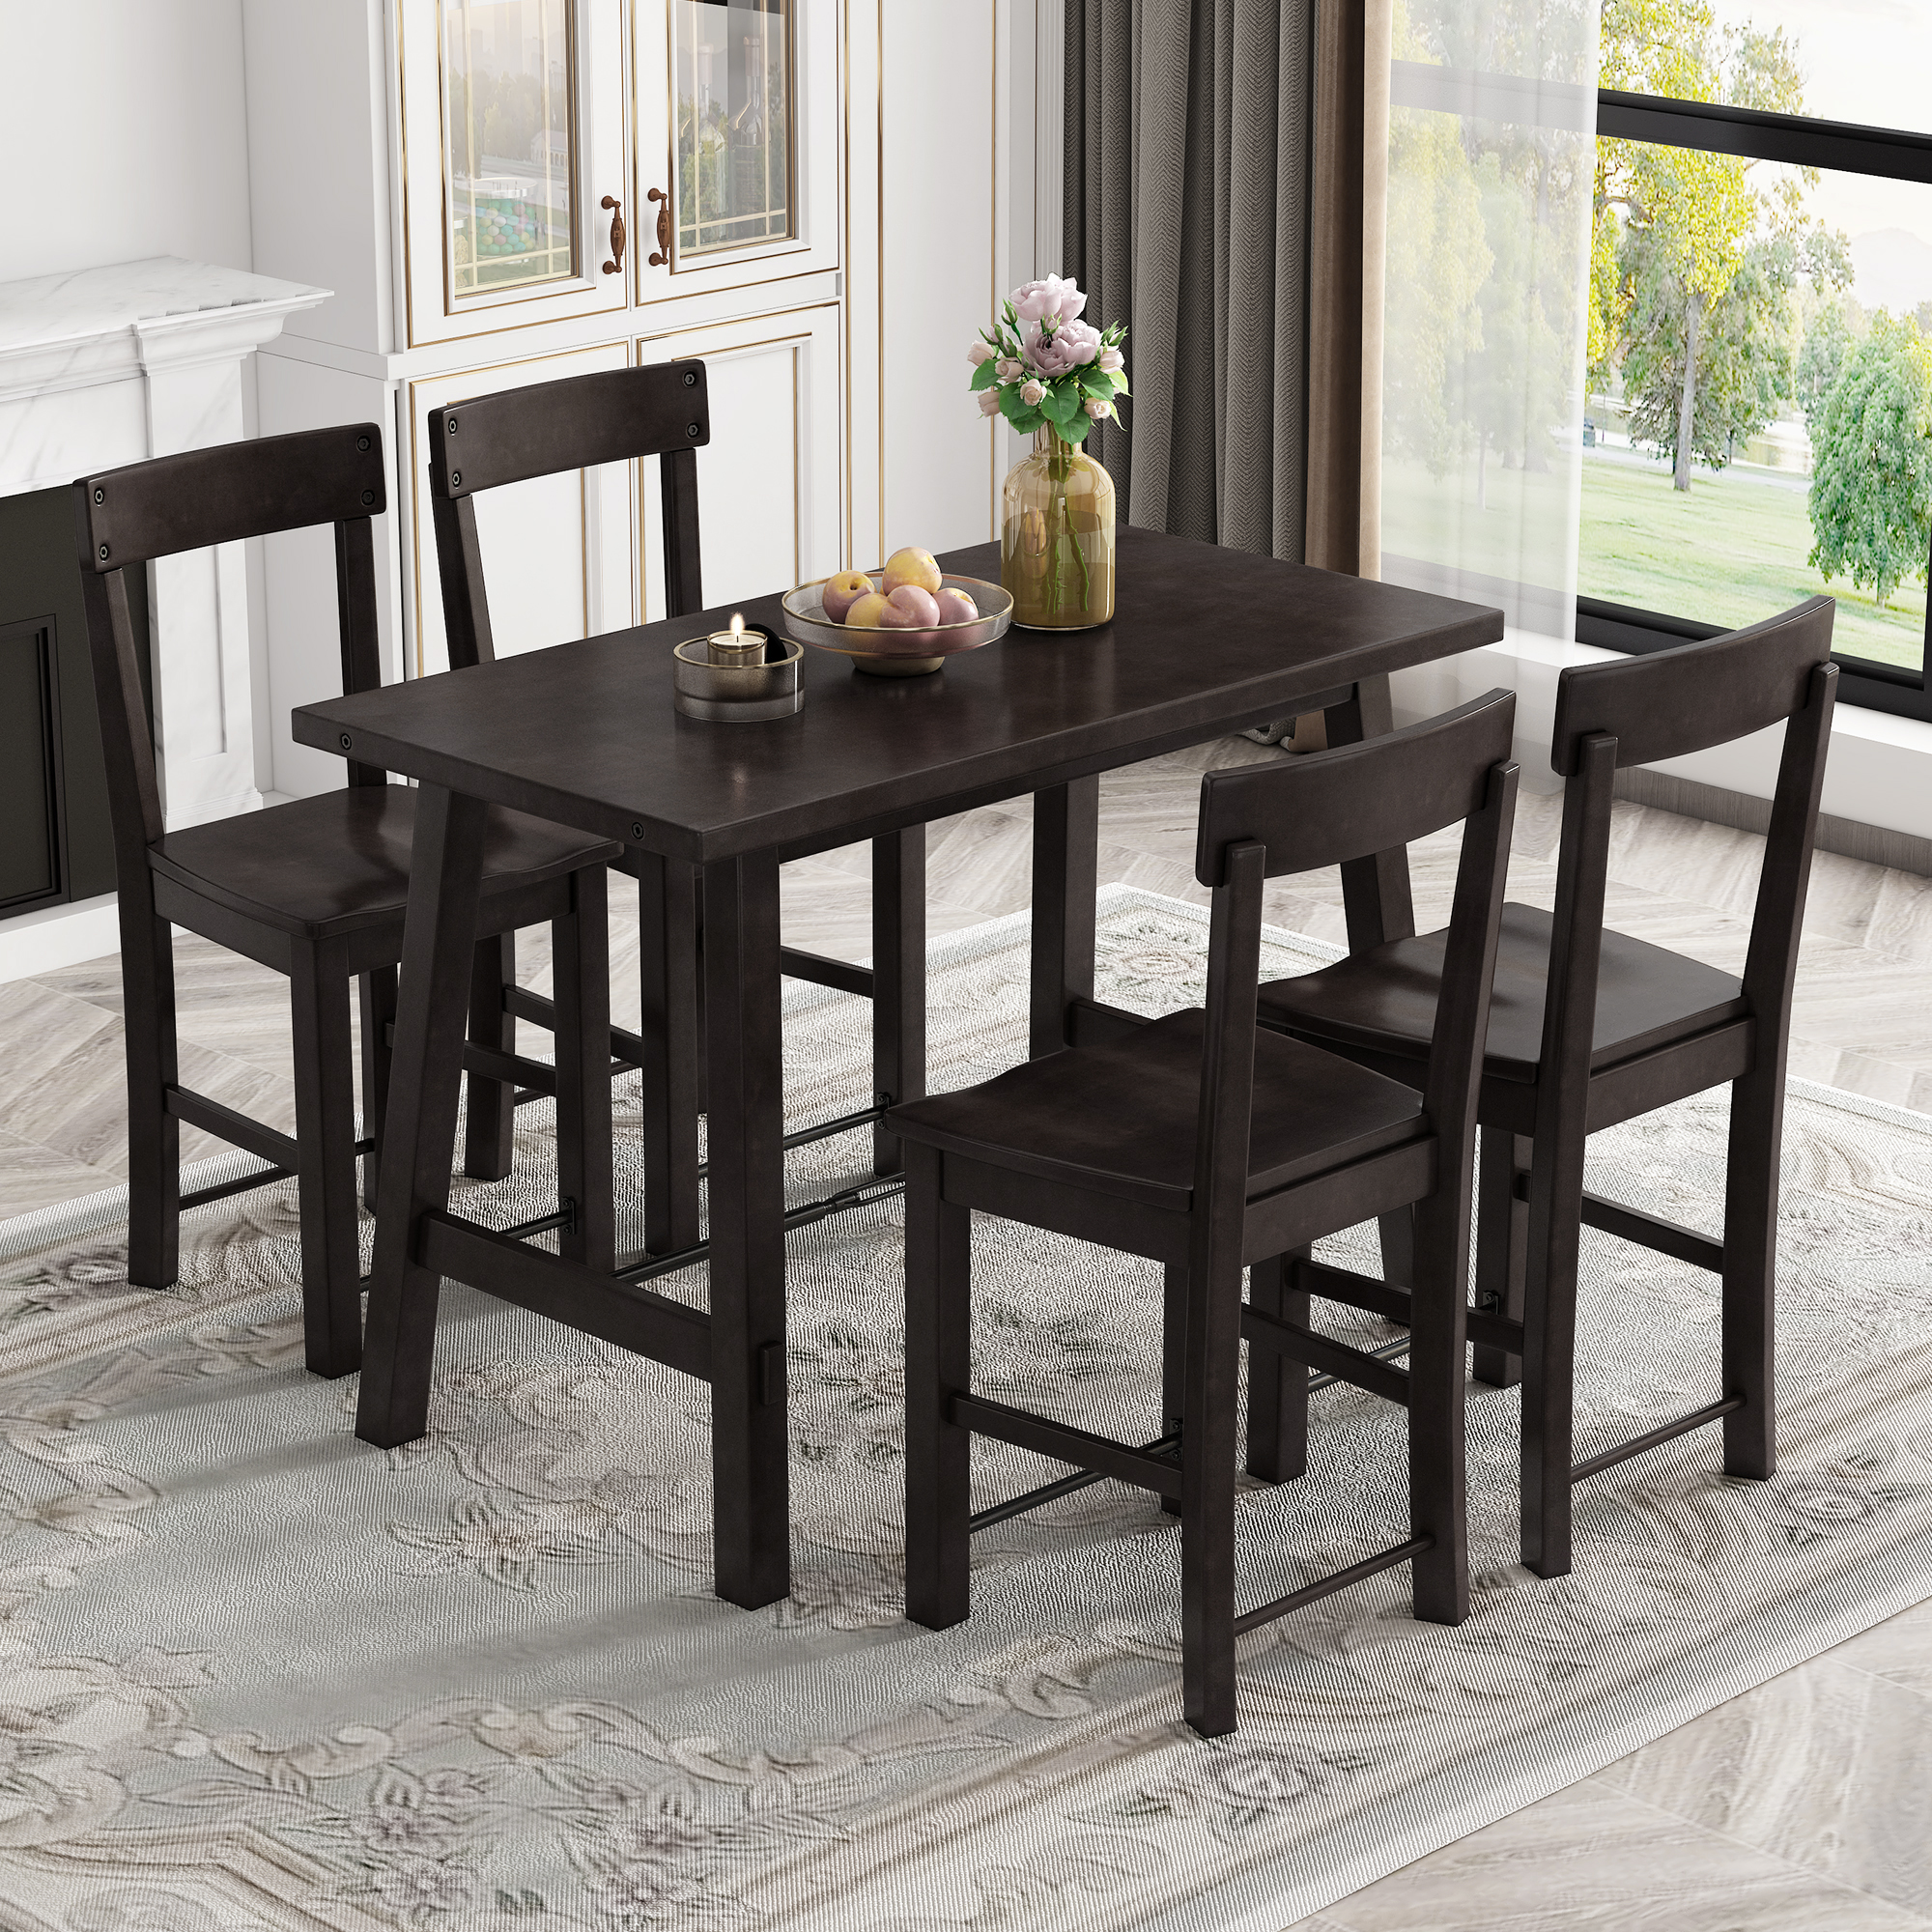 Minimalist Industrial Style 5-piece Dining Table Set - ST000075AAP